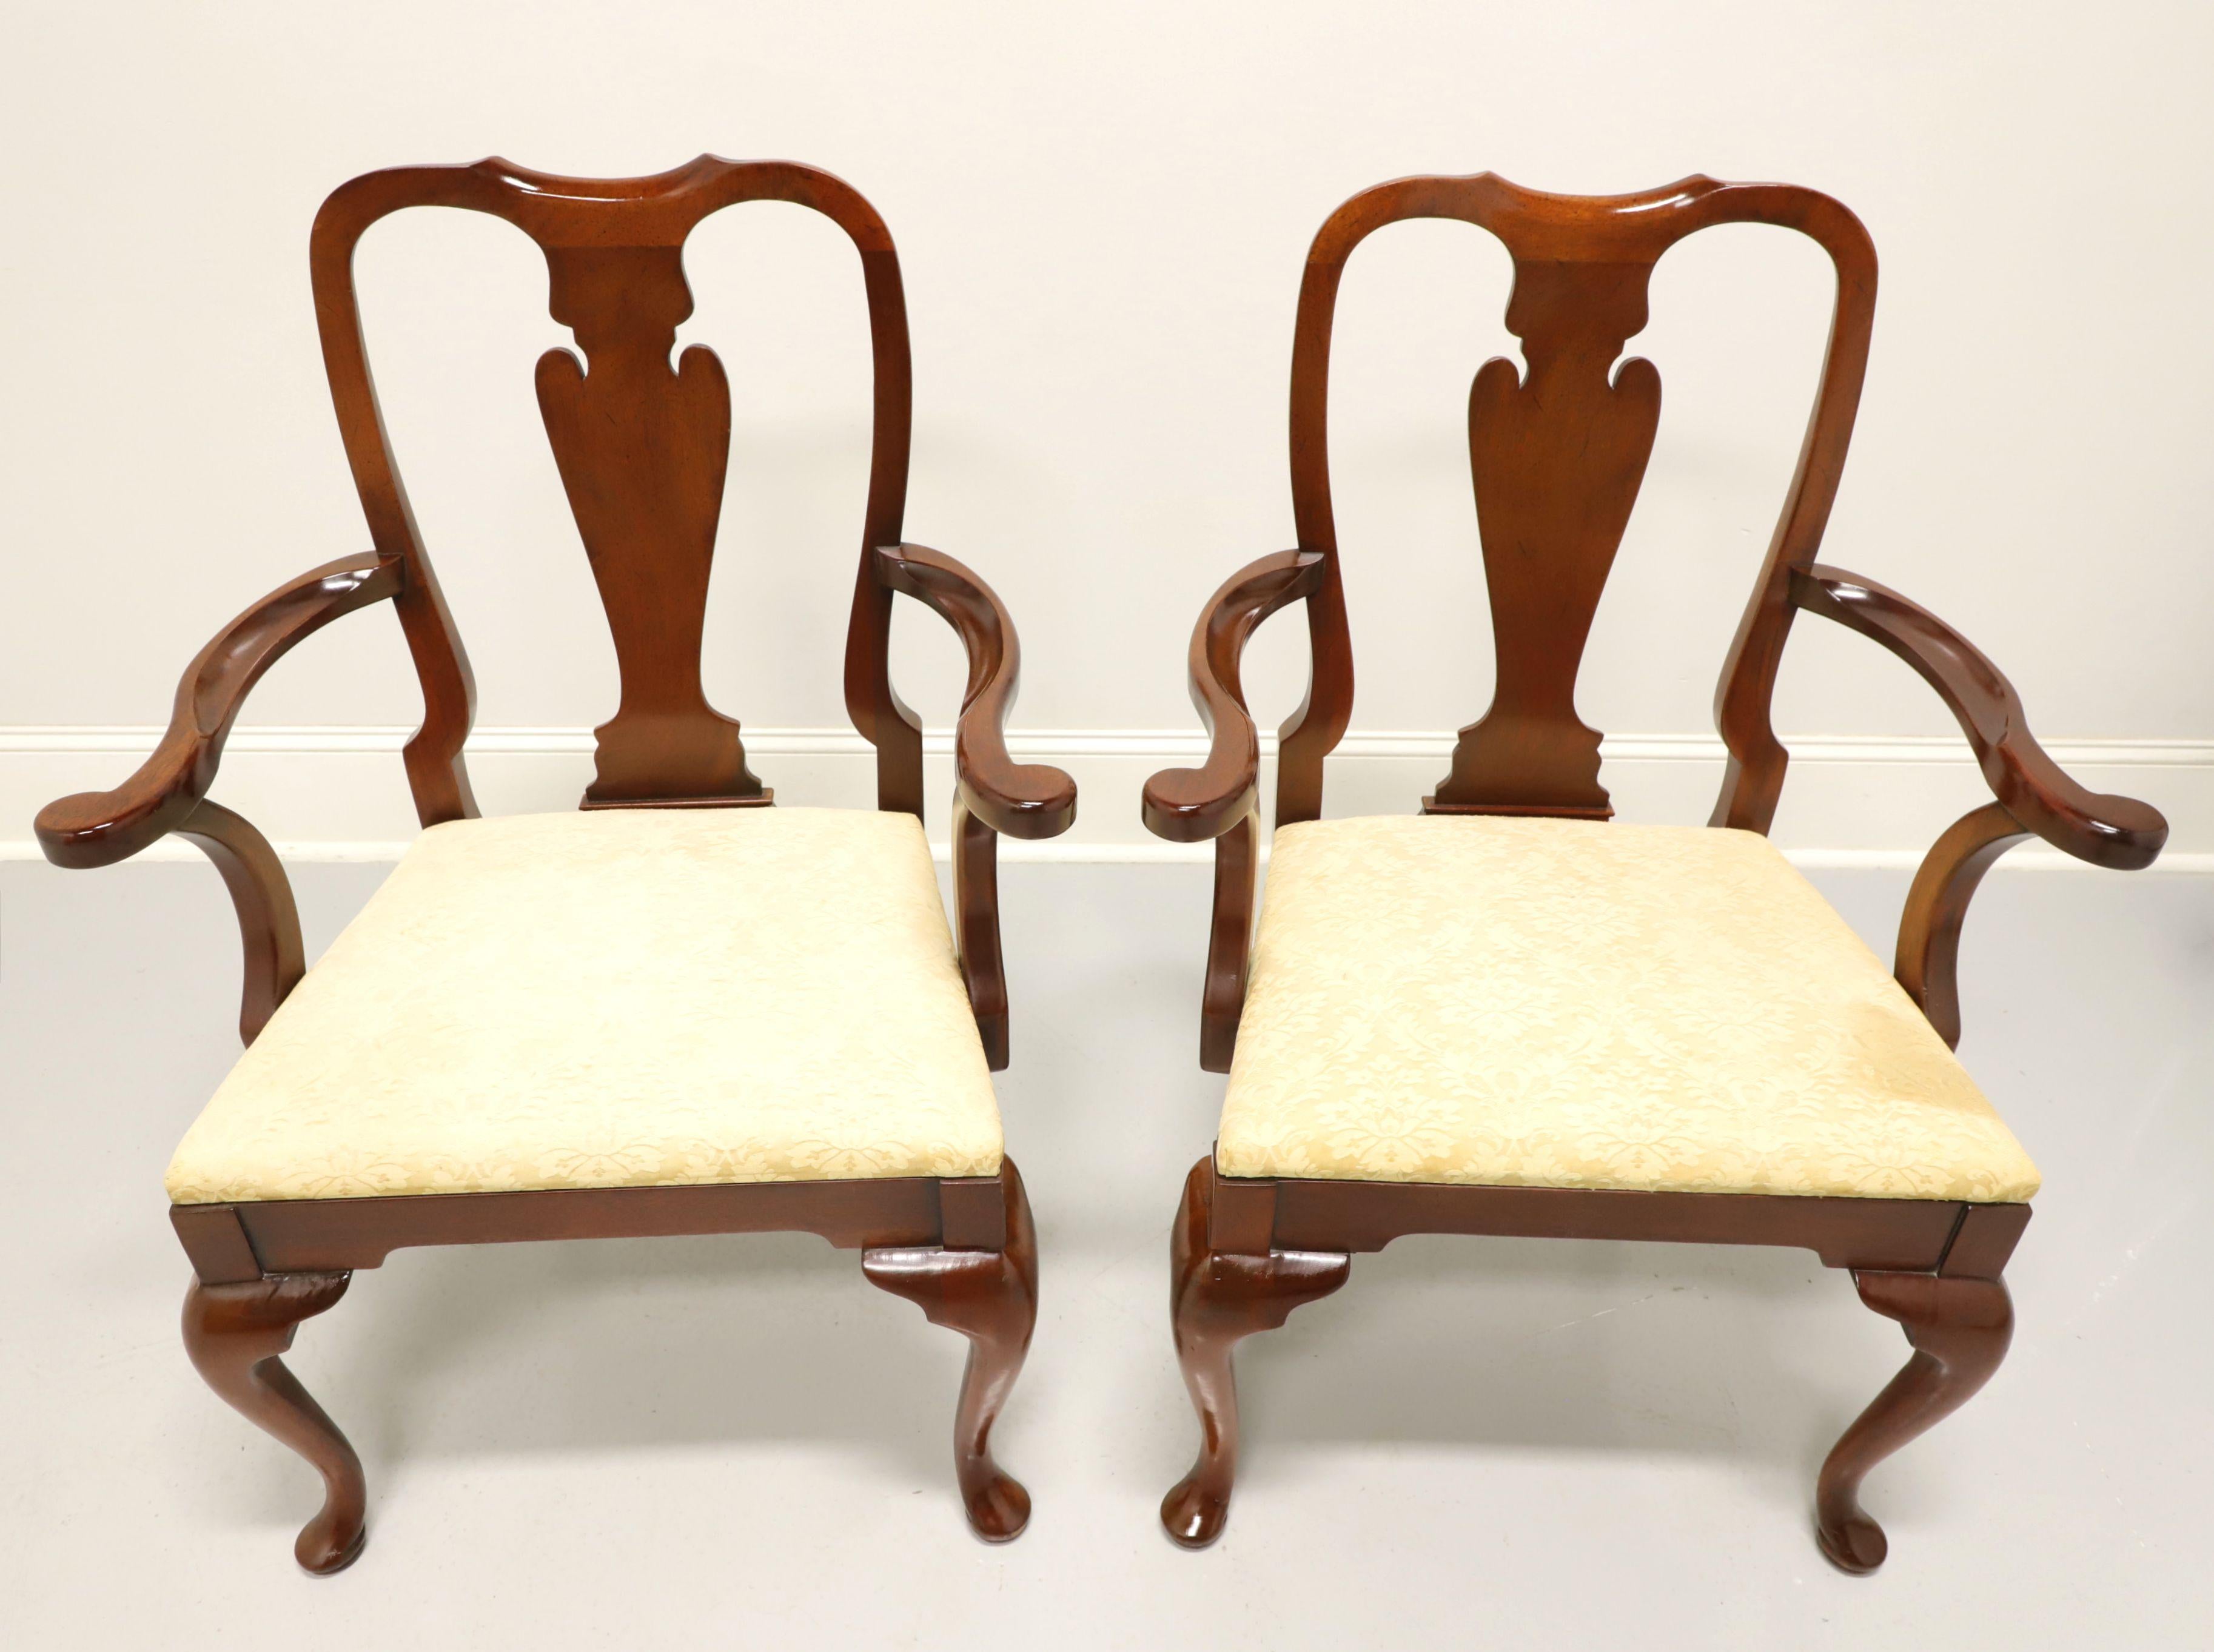 A pair of Queen Anne style dining armchairs by top quality furniture maker, Hickory Chair Company. Solid mahogany with their Amber Mahogany finish, carved back rest, curved arms, creamy gold color brocade fabric upholstered seat, cabriole front legs